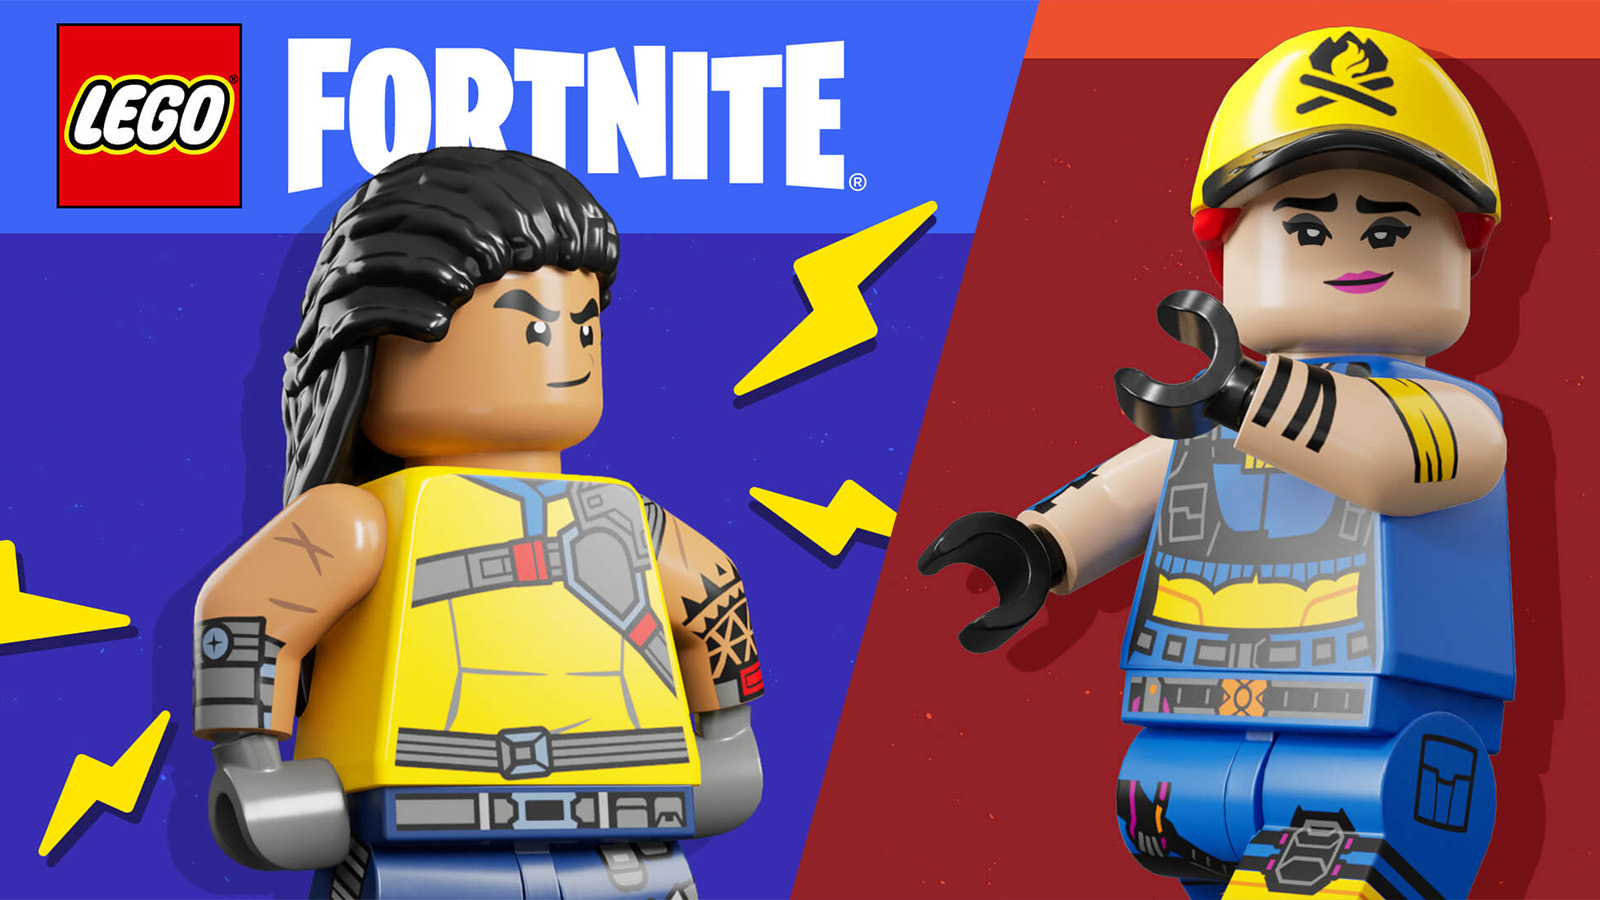 ▻ The LEGO Fortnite video game is available